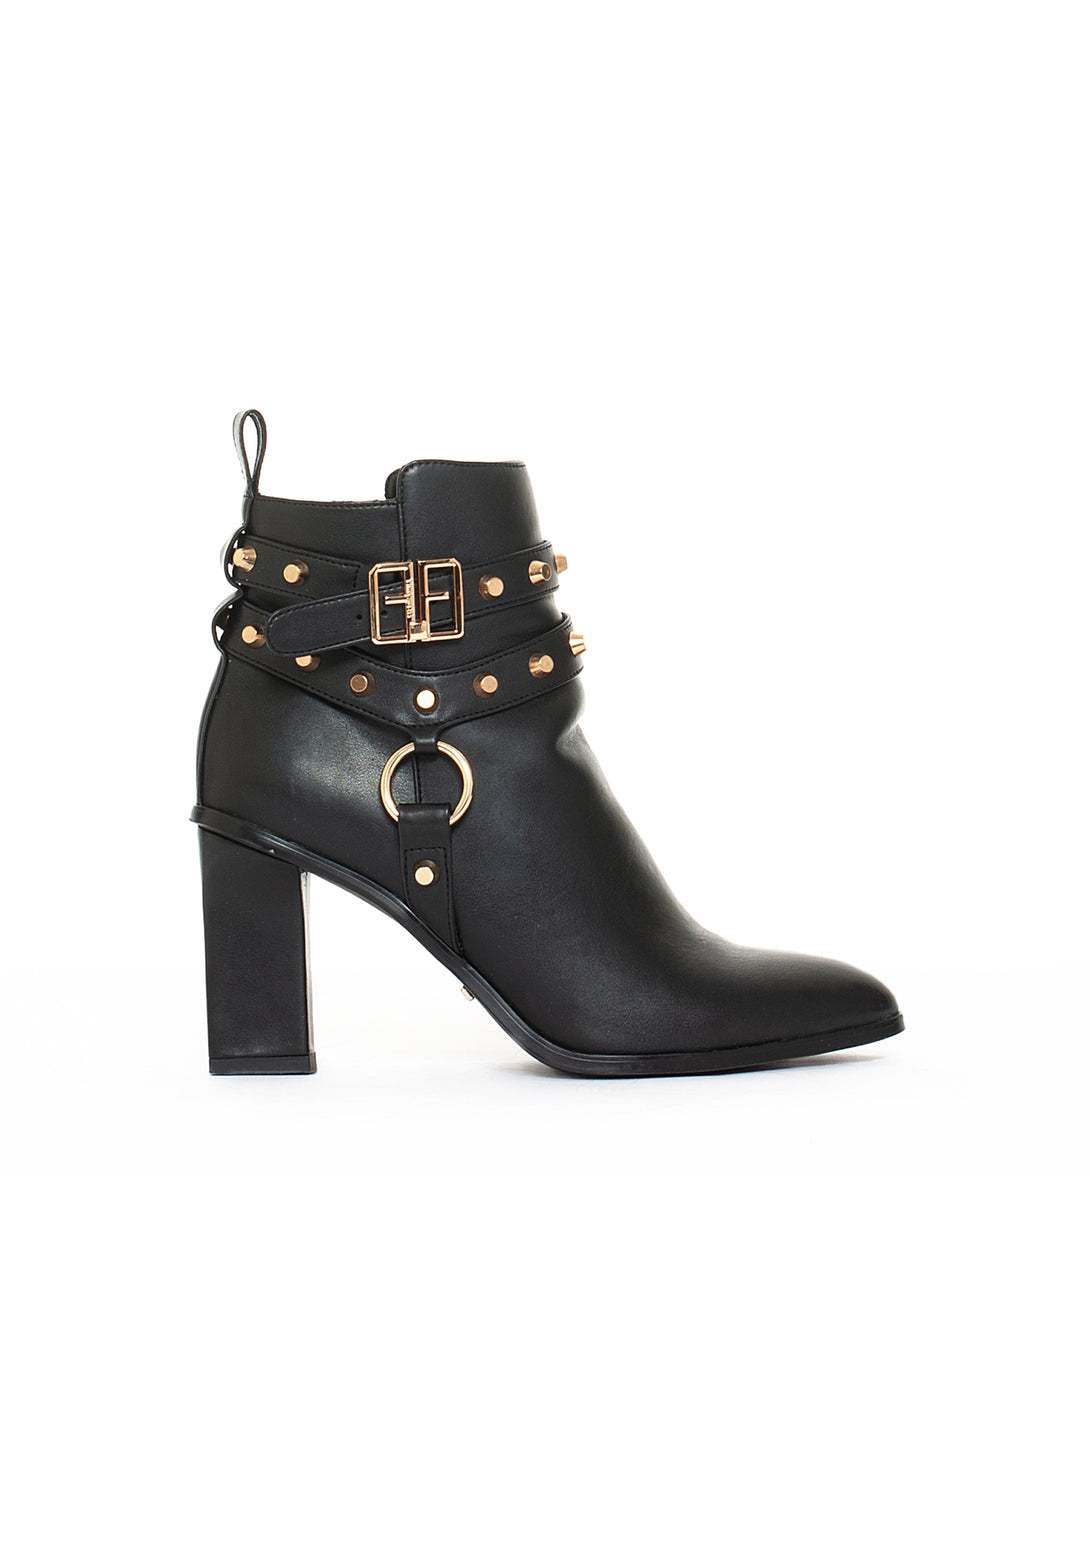 Ankle boots made in eco leather with metallic studs Fracomina F722WS5003P41101-053